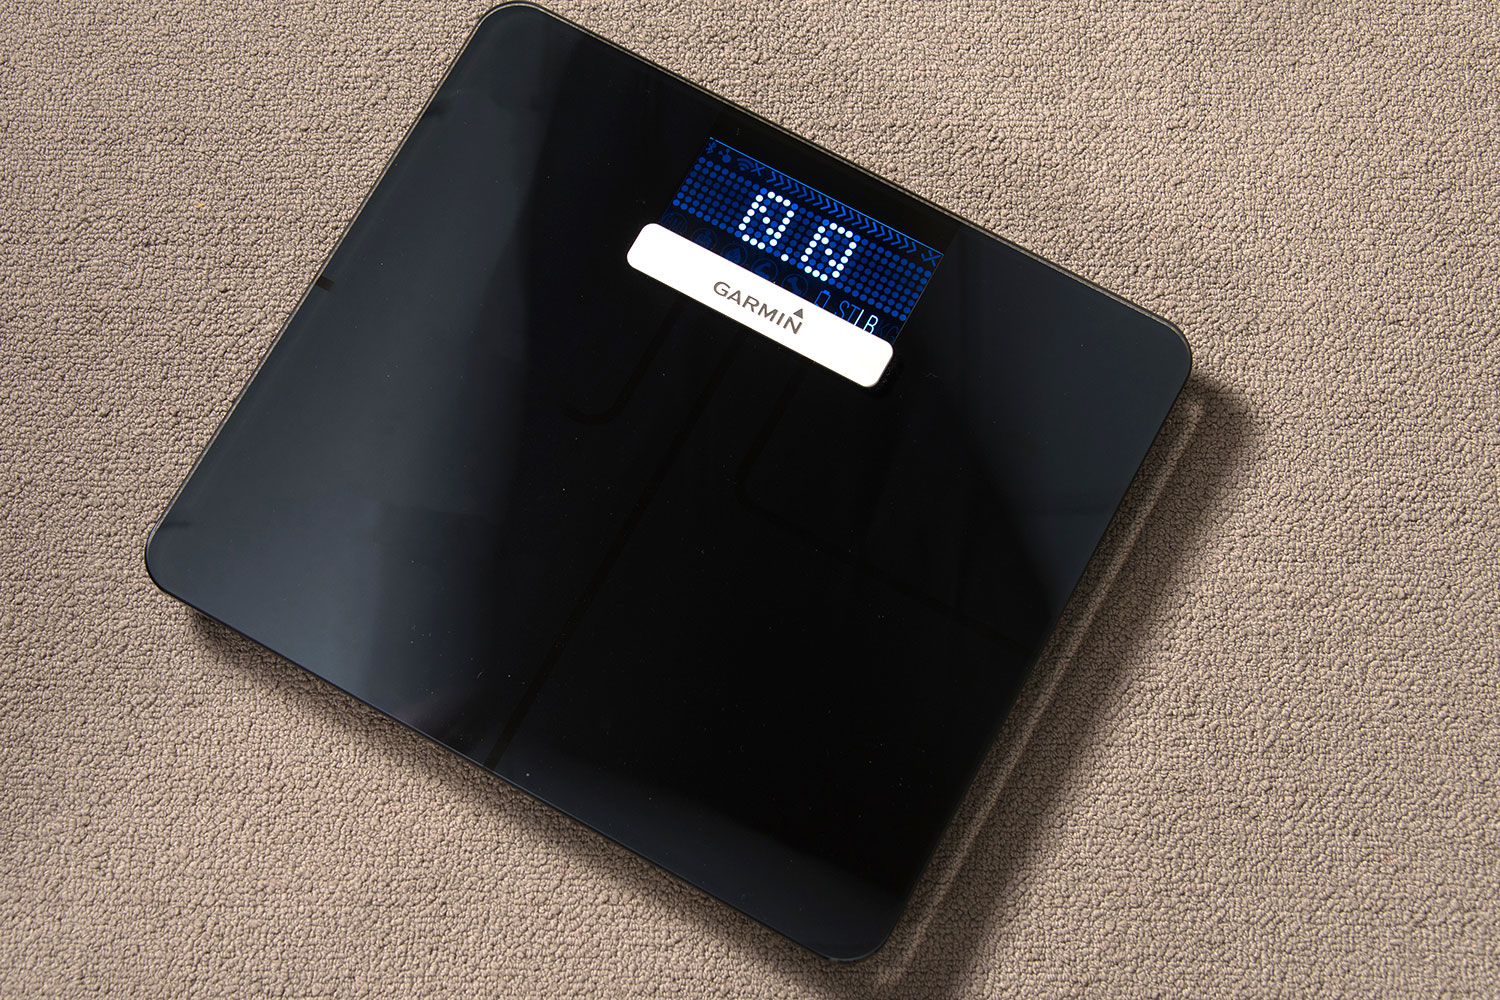 Garmin Index Smart Scale - Device Overview